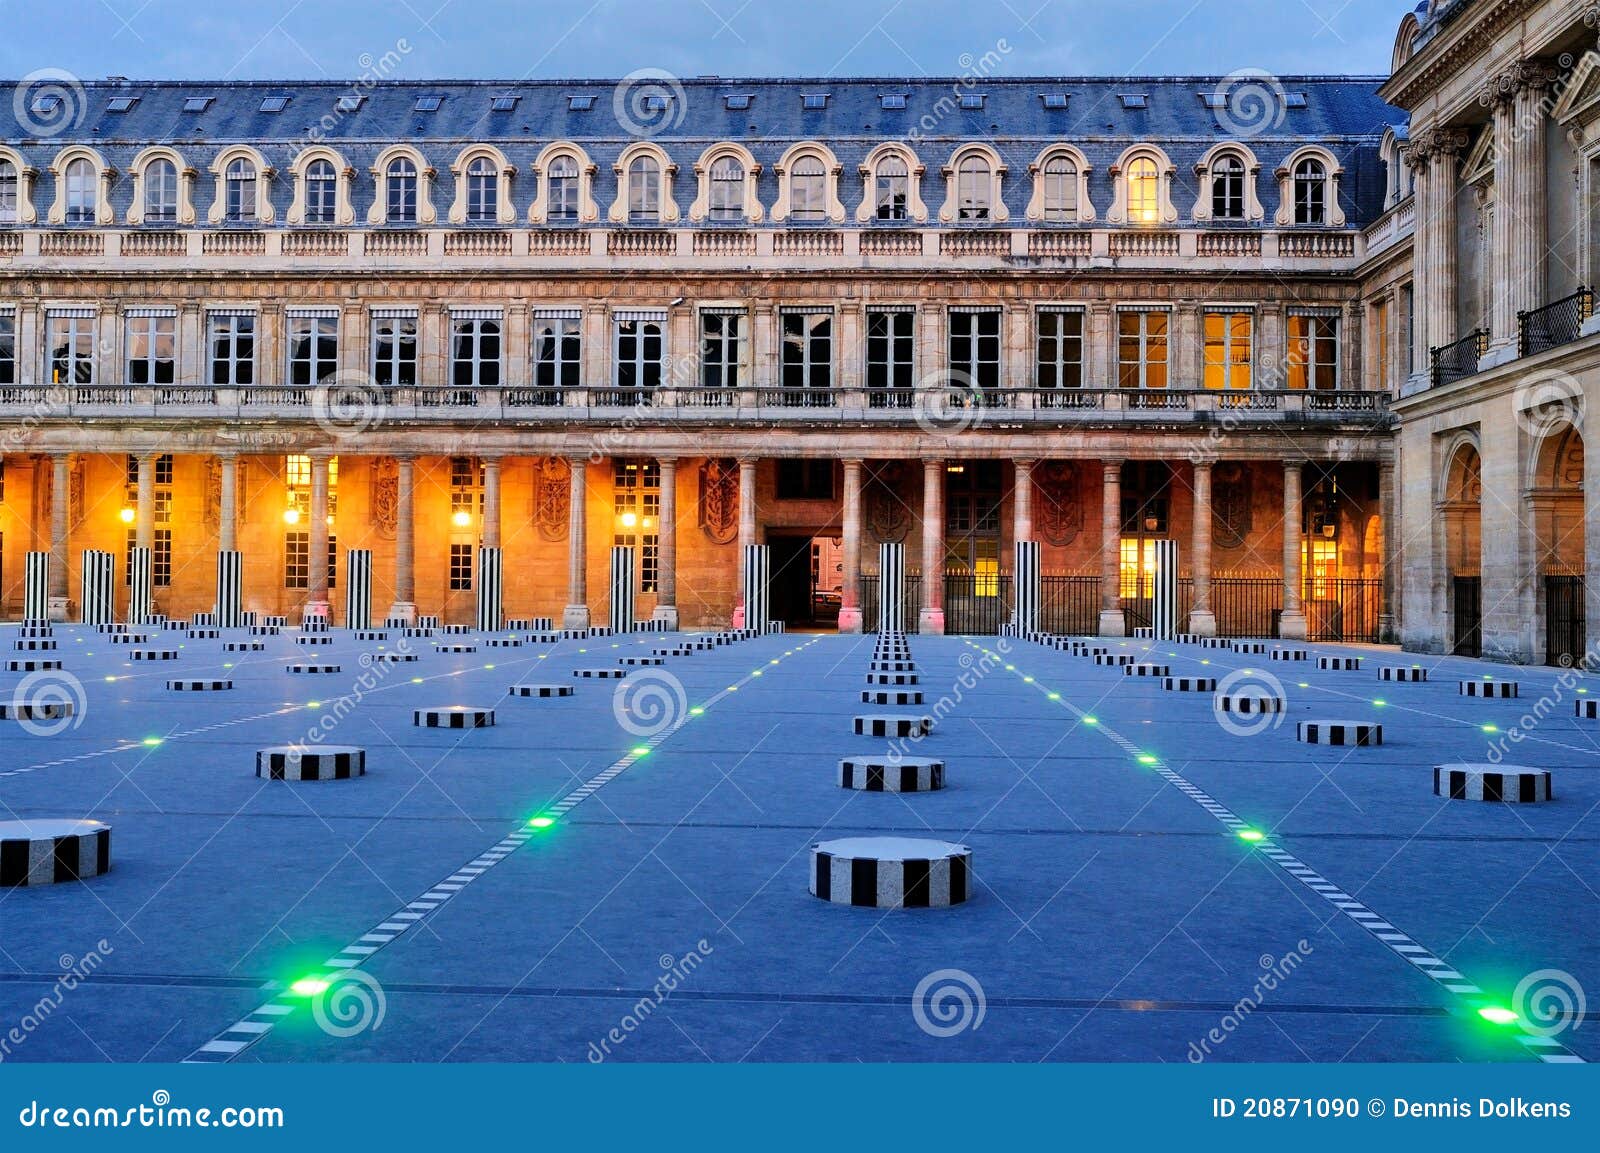 courtyard of palais royale in the evening